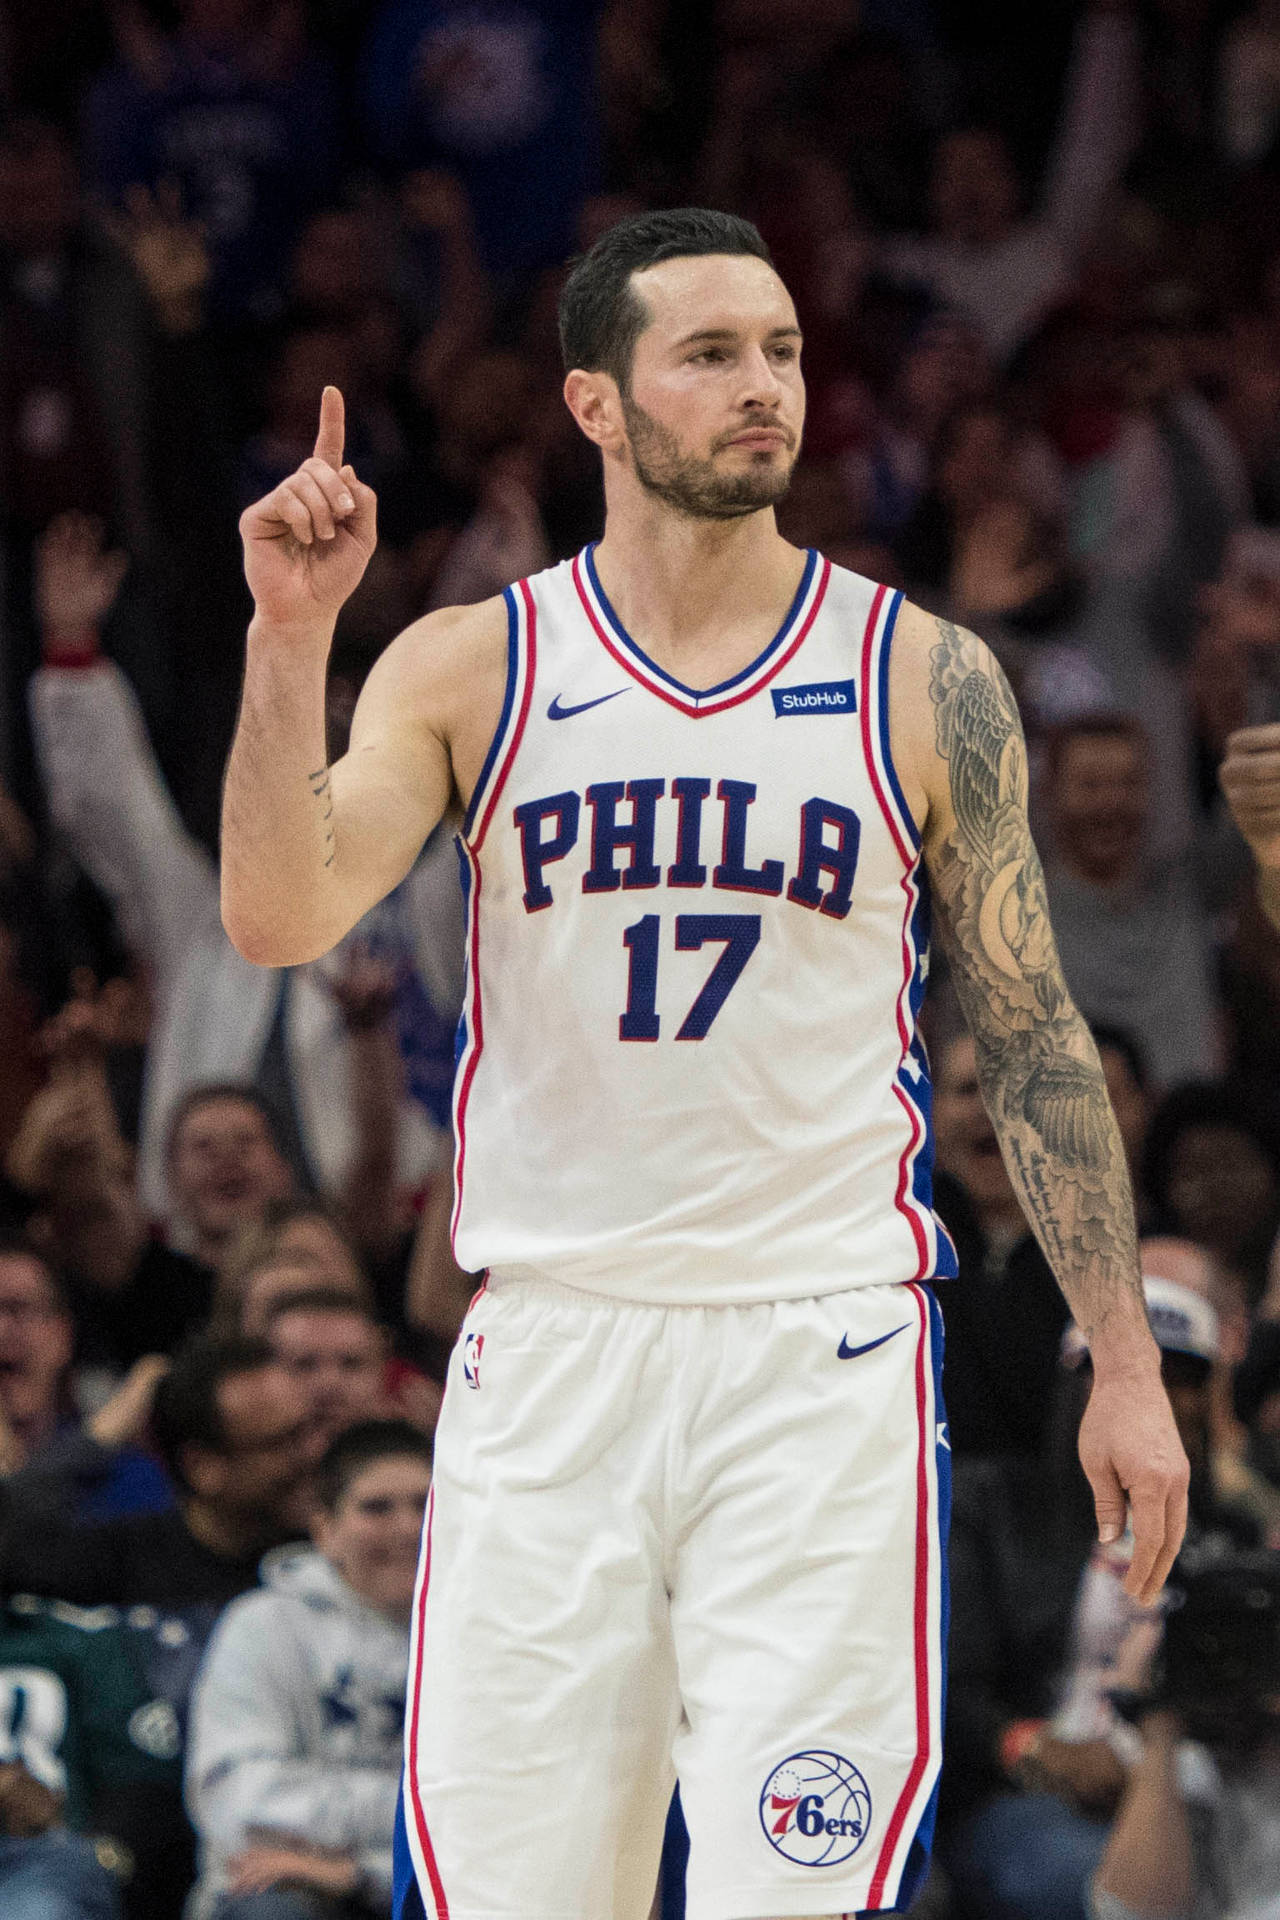 Jj Redick While Pointing Above